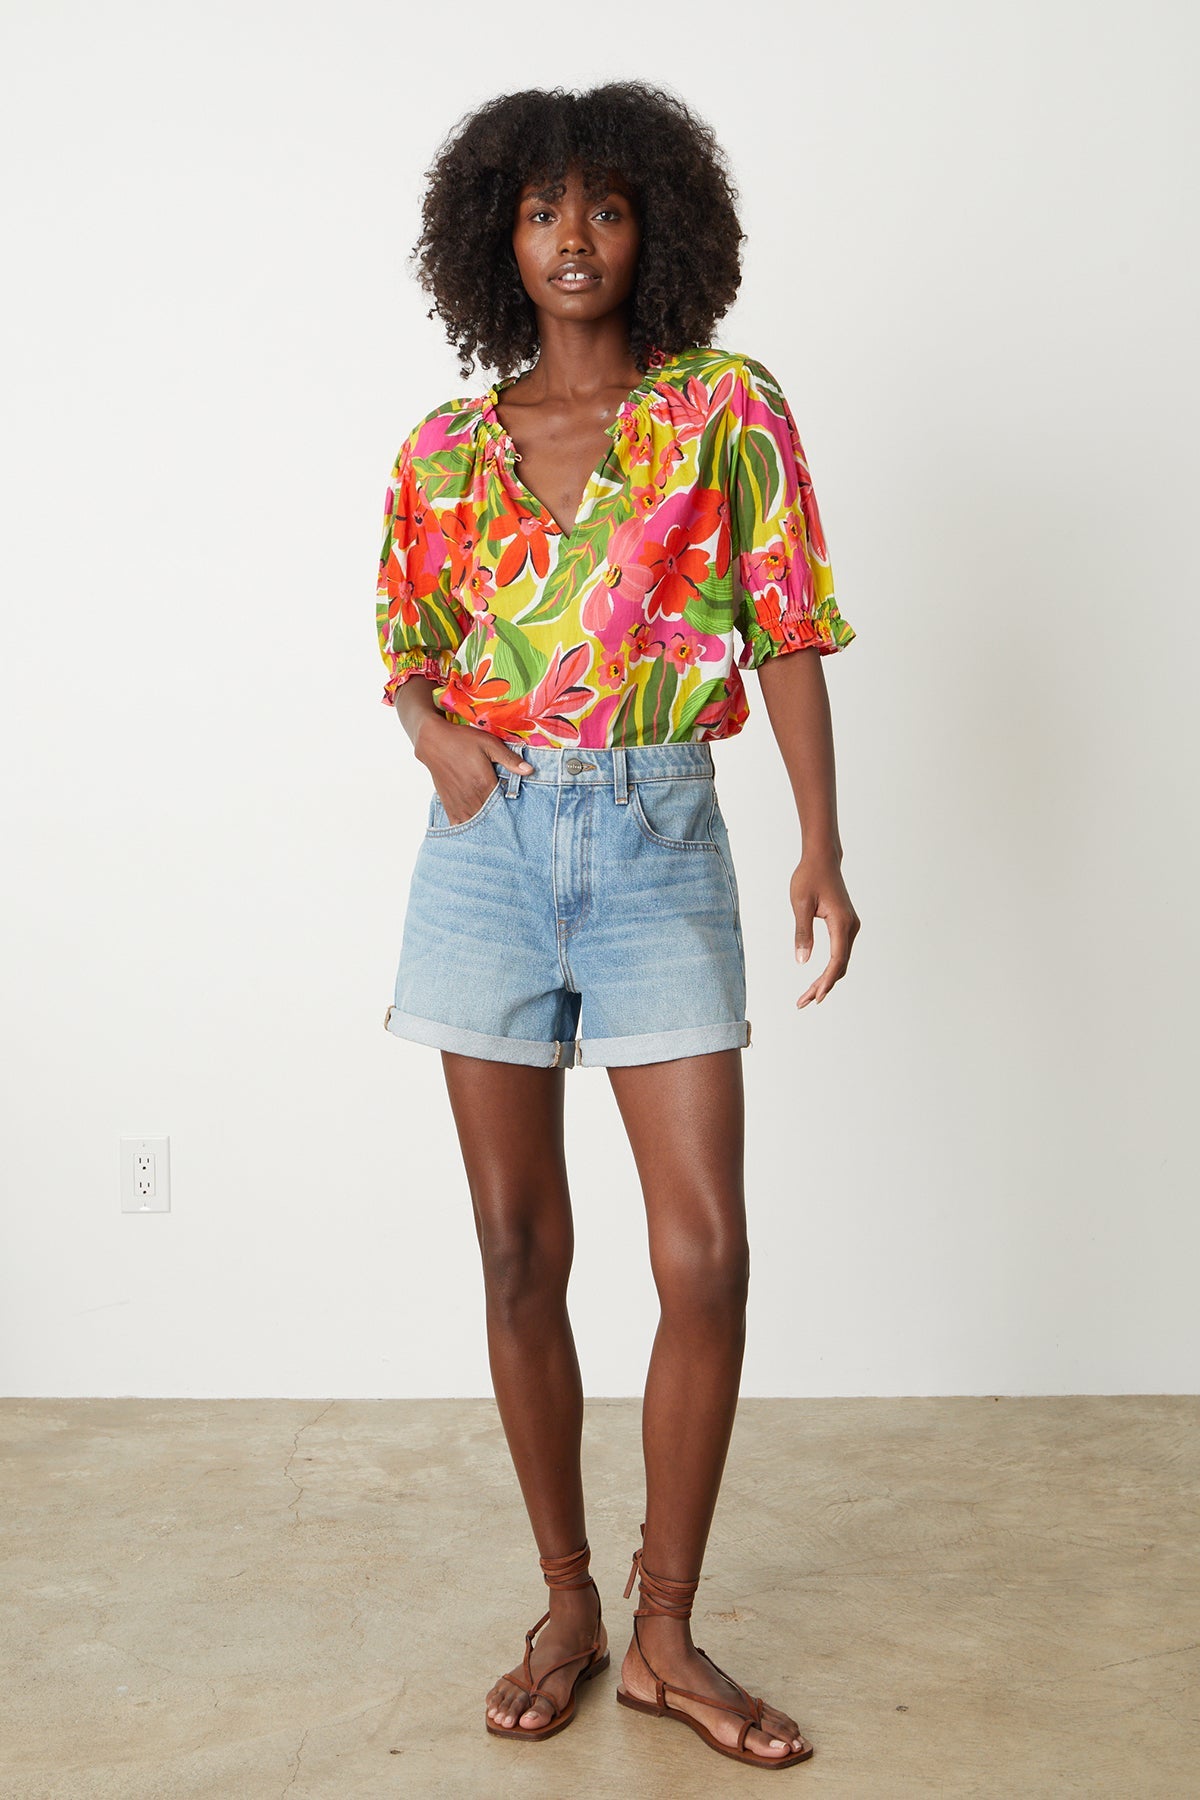 Carrie Boho Top in bold floral aloha print with reds, hot pinks and greens with blue denim shorts full length front-26715112898753